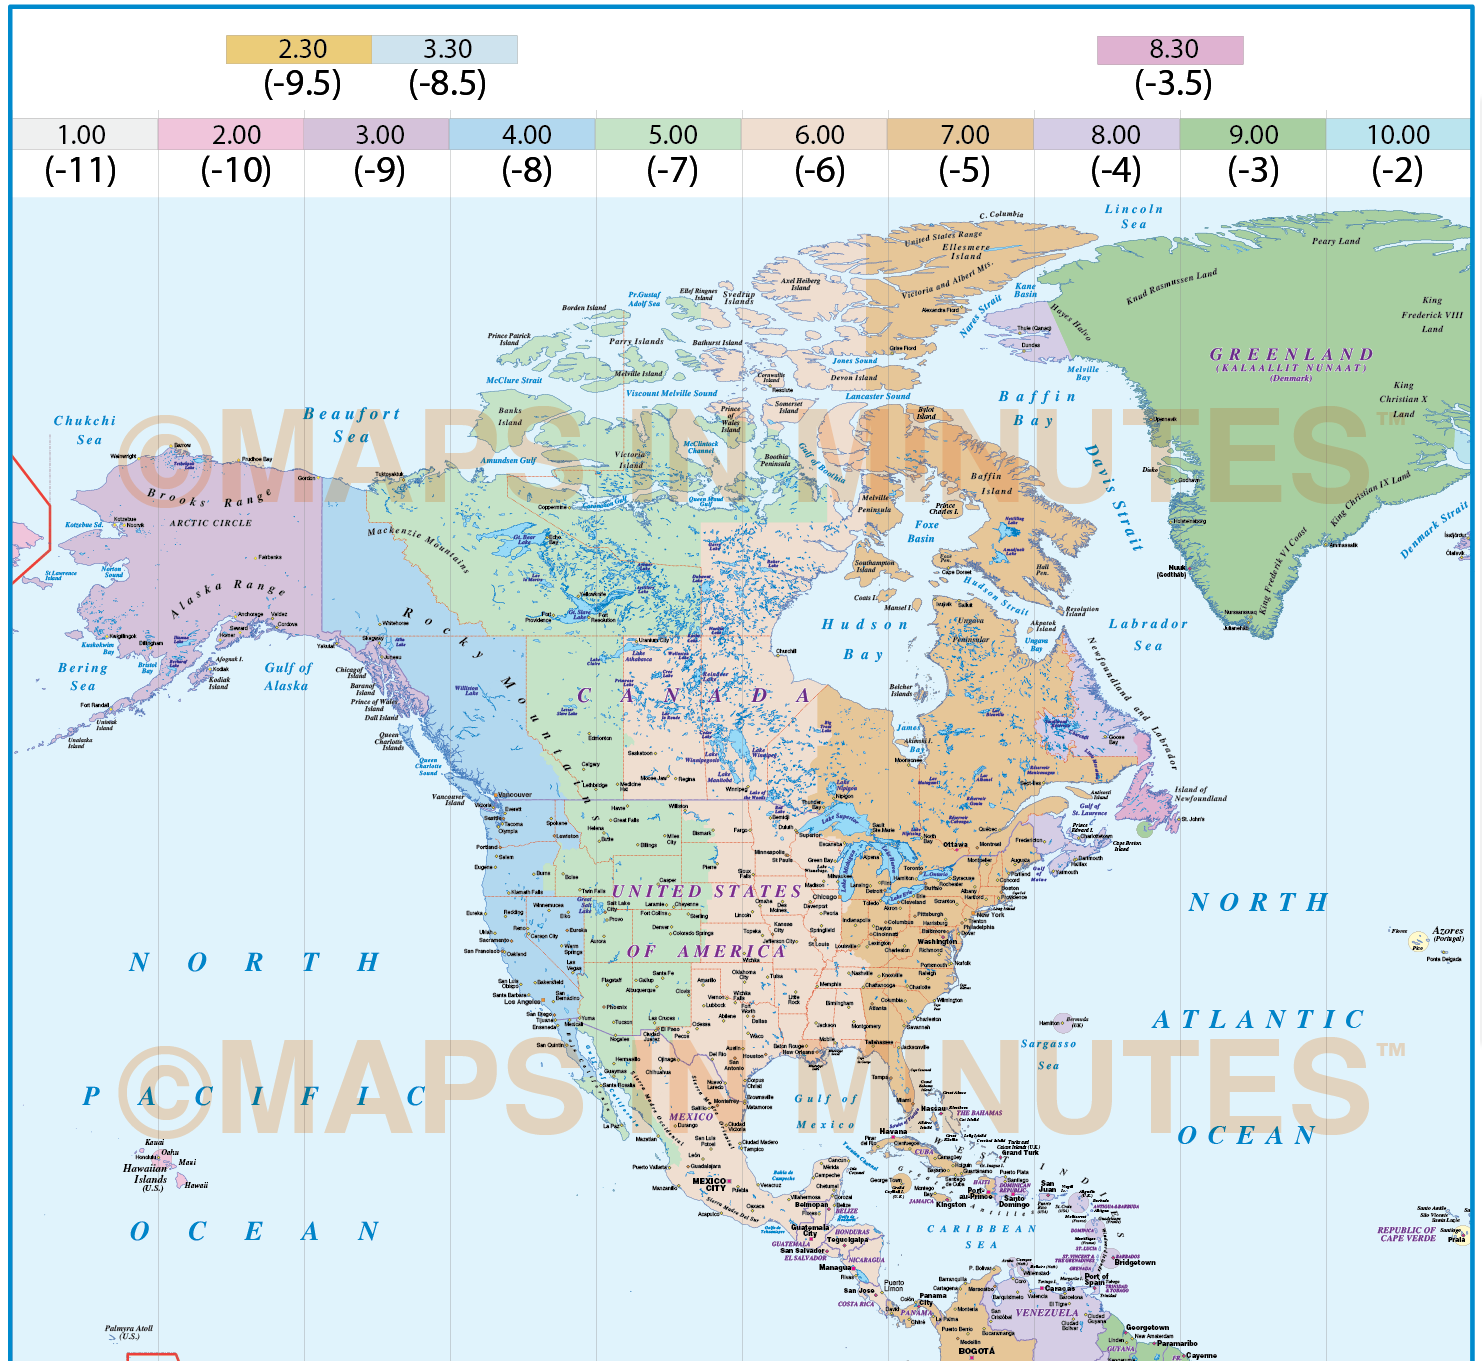 North America Time Zone Map